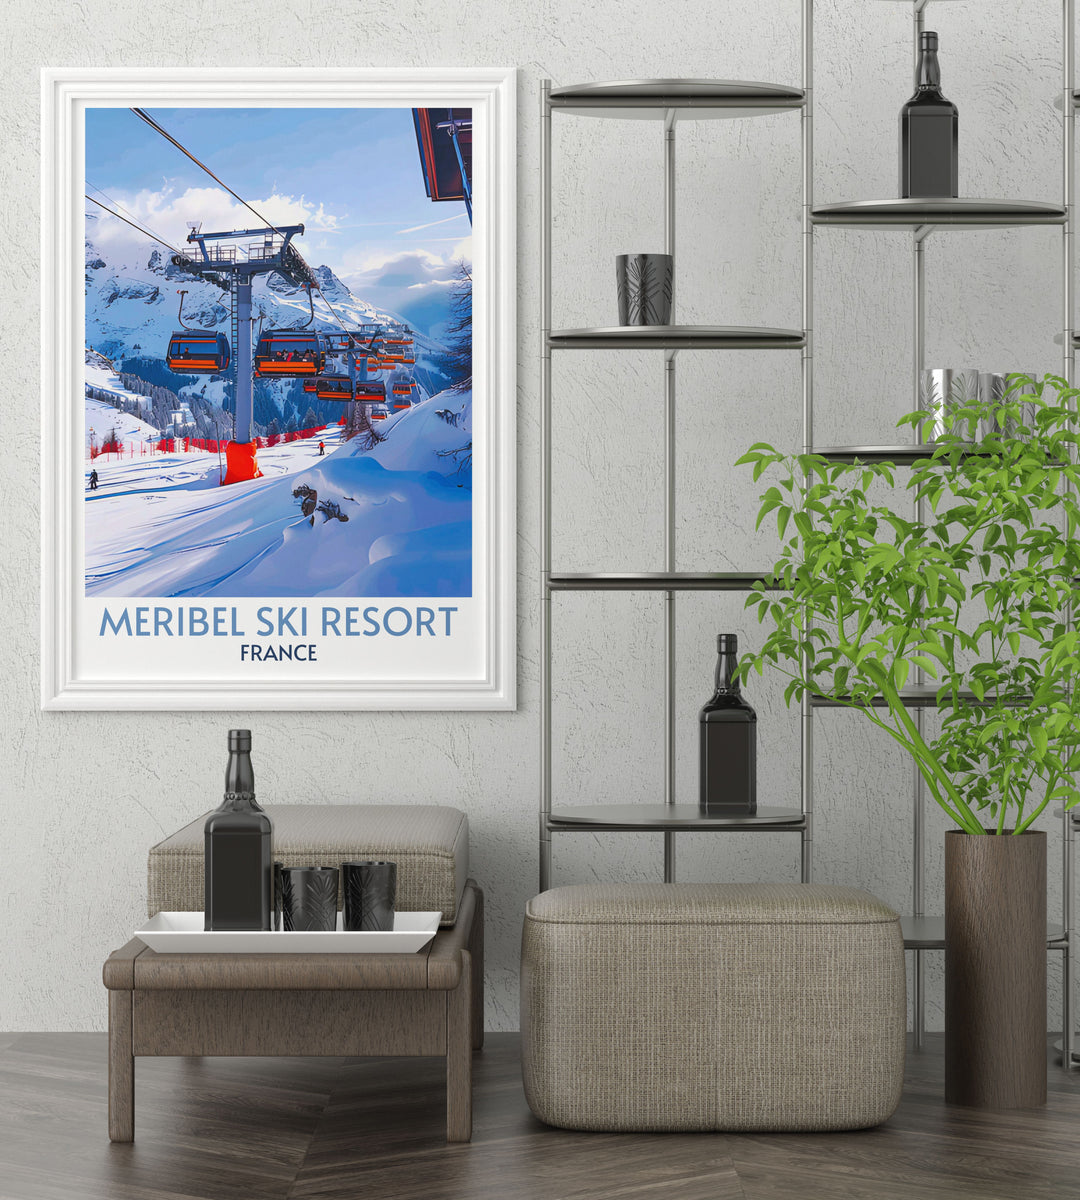 Art print depicting a scenic view from the top of a ski lift in Meribel, offering a birds eye view of the expansive snow covered mountains.